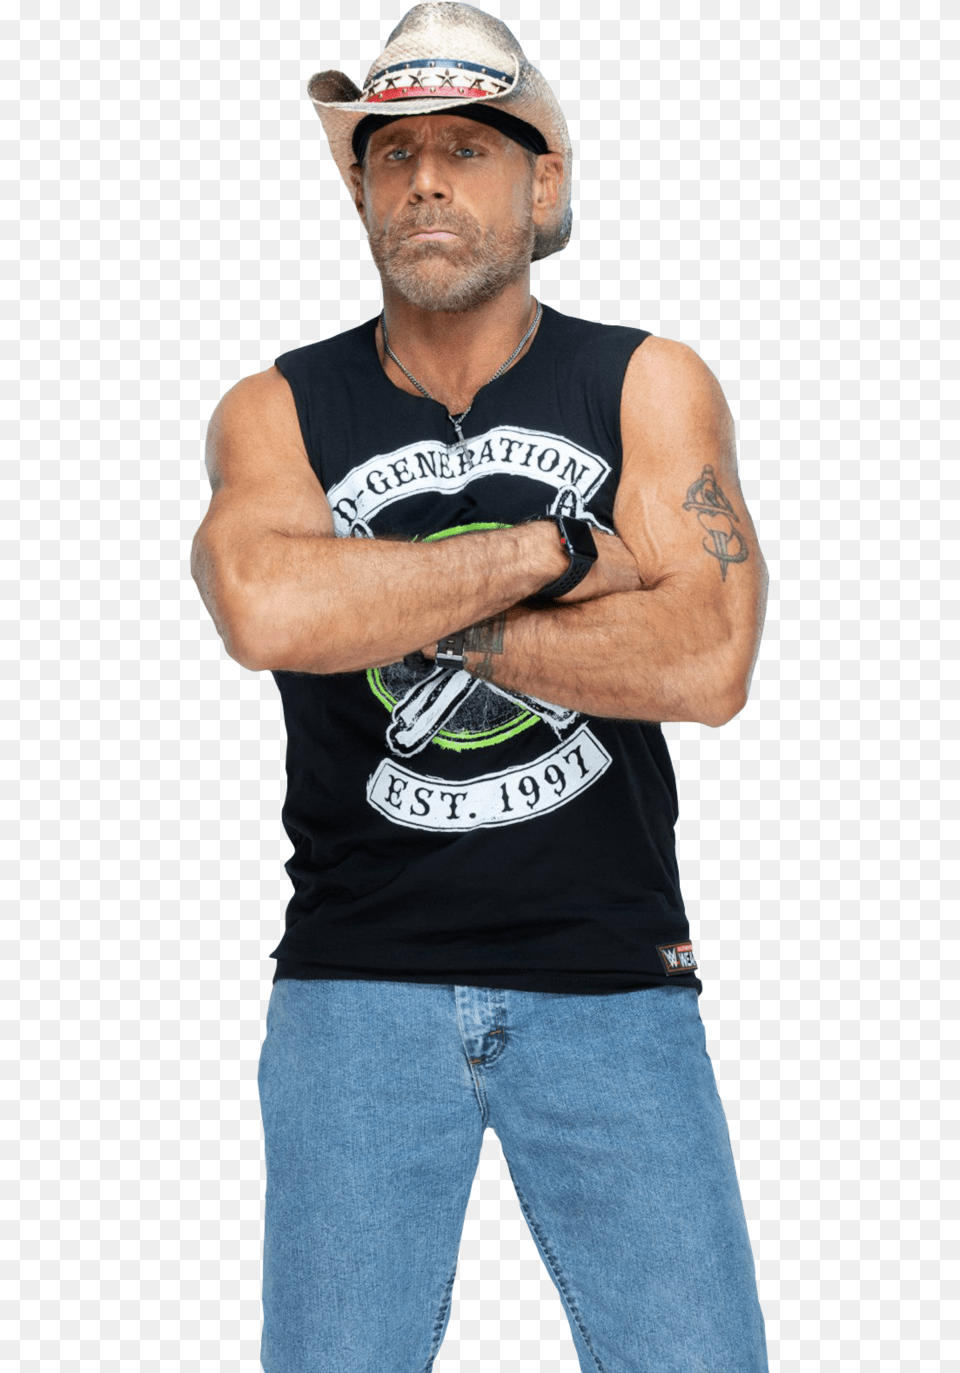 Shawn Michaels Shawn Michaels Then And Now, Pants, T-shirt, Jeans, Clothing Png Image